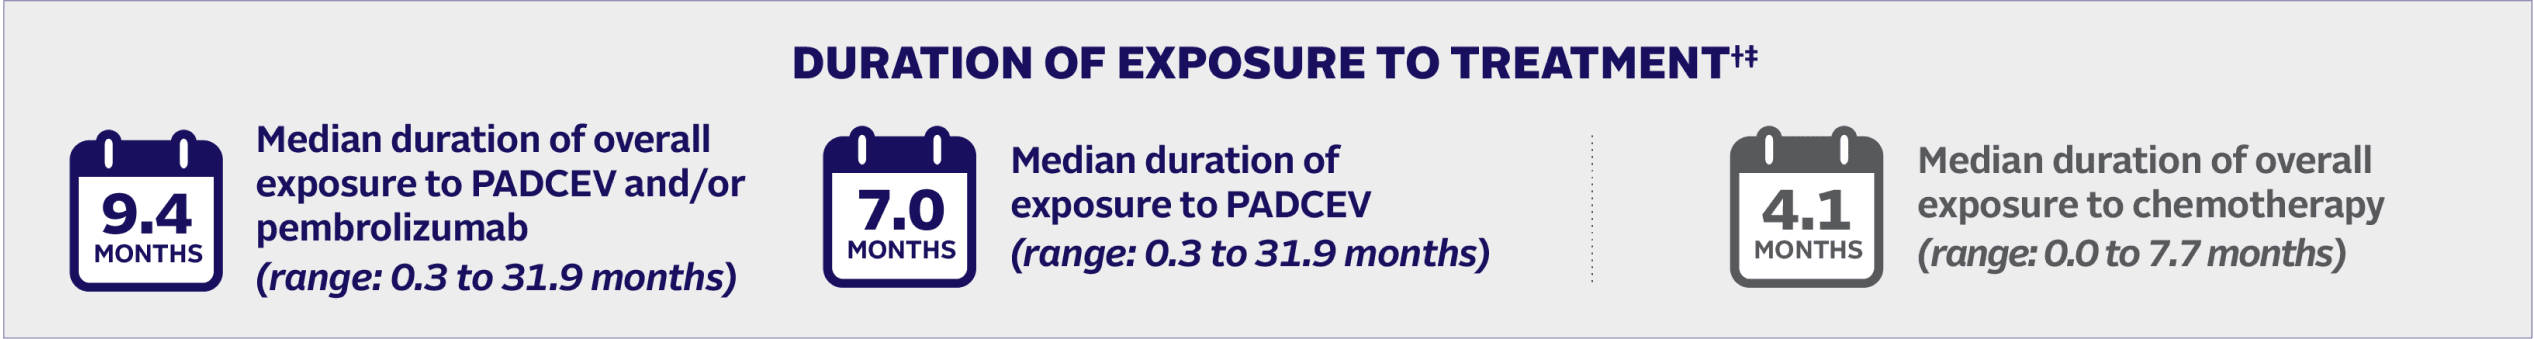 Median durations of exposure to treatment for PADCEV and/or pembrolizumab, PADCEV, and chemotherapy.